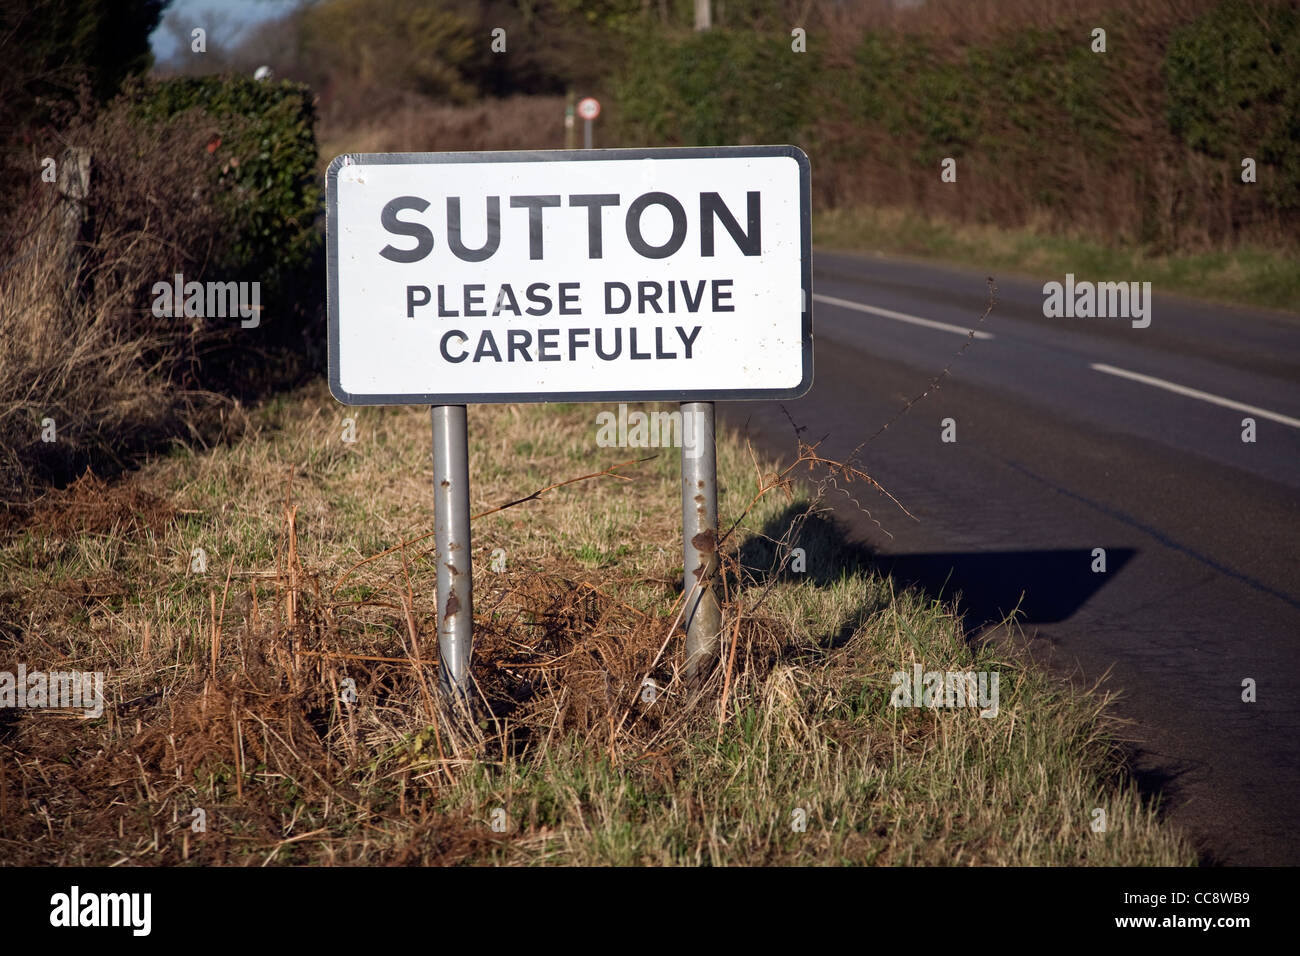 Please drive carefully through the village sign 